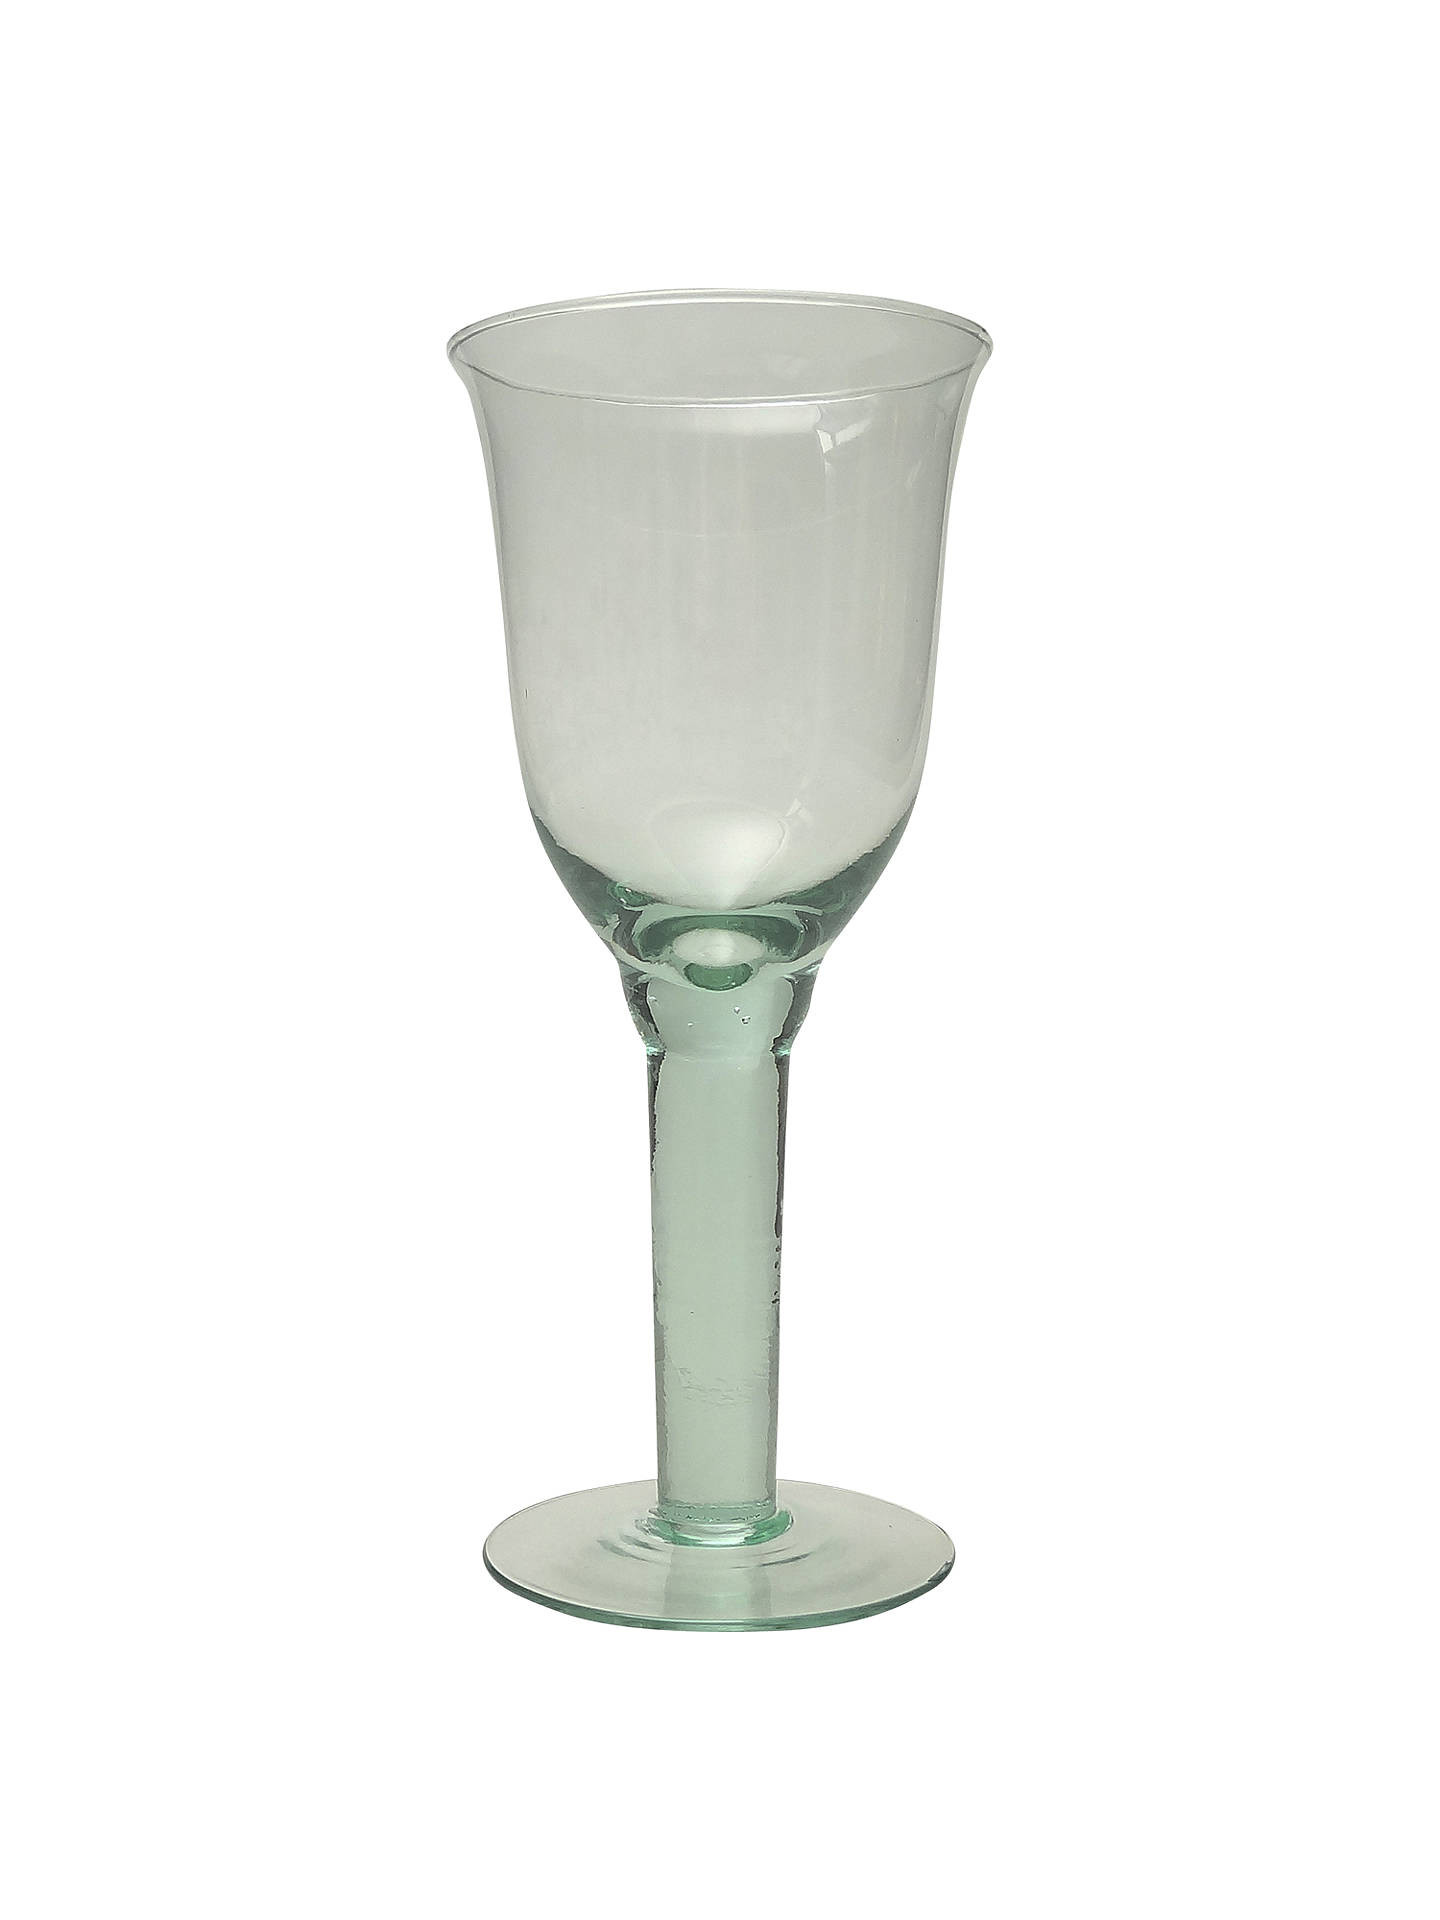 19 Lovable Vidrios San Miguel Vase 2024 free download vidrios san miguel vase of vidrios san miguel recycled glass tulip wine glass clear large with regard to buyvidrios san miguel recycled glass tulip wine glass clear large 360ml online at joh